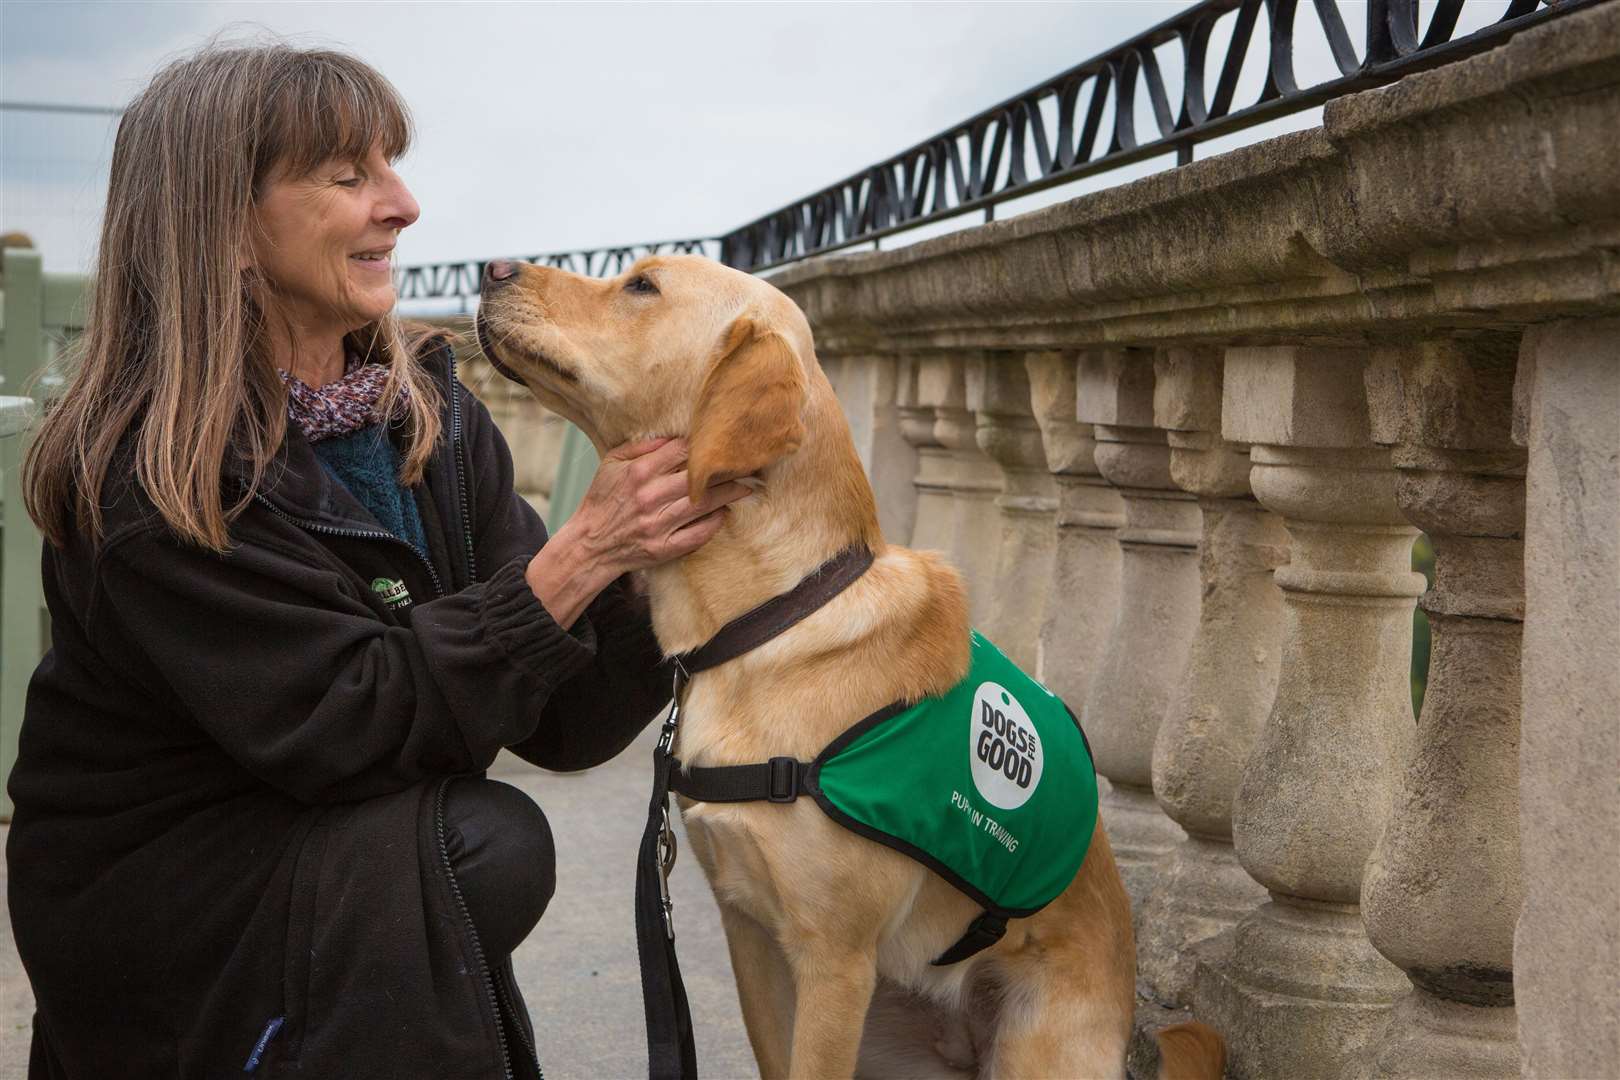 Assistance dog in training - puppy with lady. Picture: Dogs for Good.